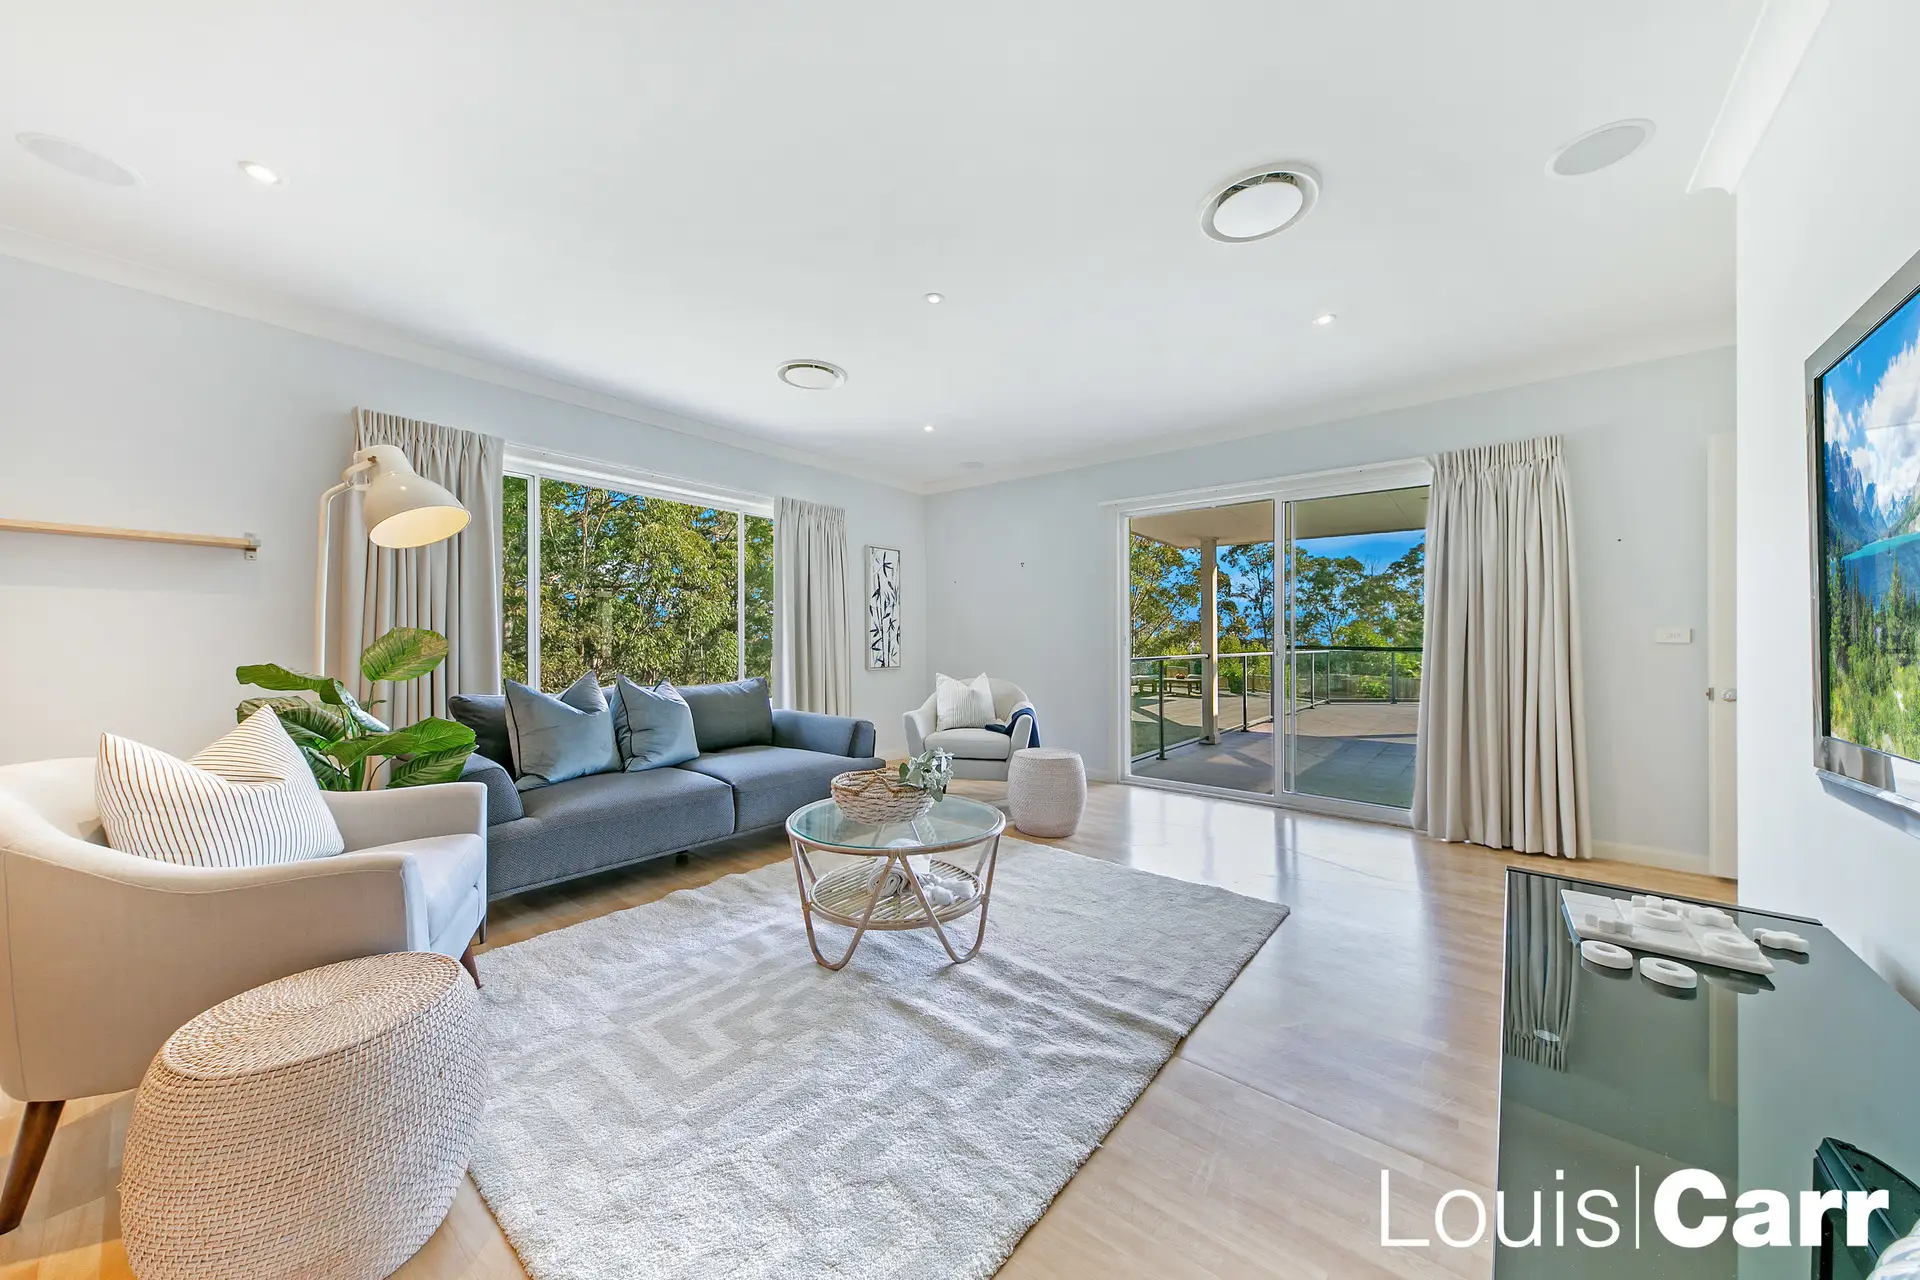 Photo #6: 22 Huntingdale Circle, Castle Hill - Sold by Louis Carr Real Estate